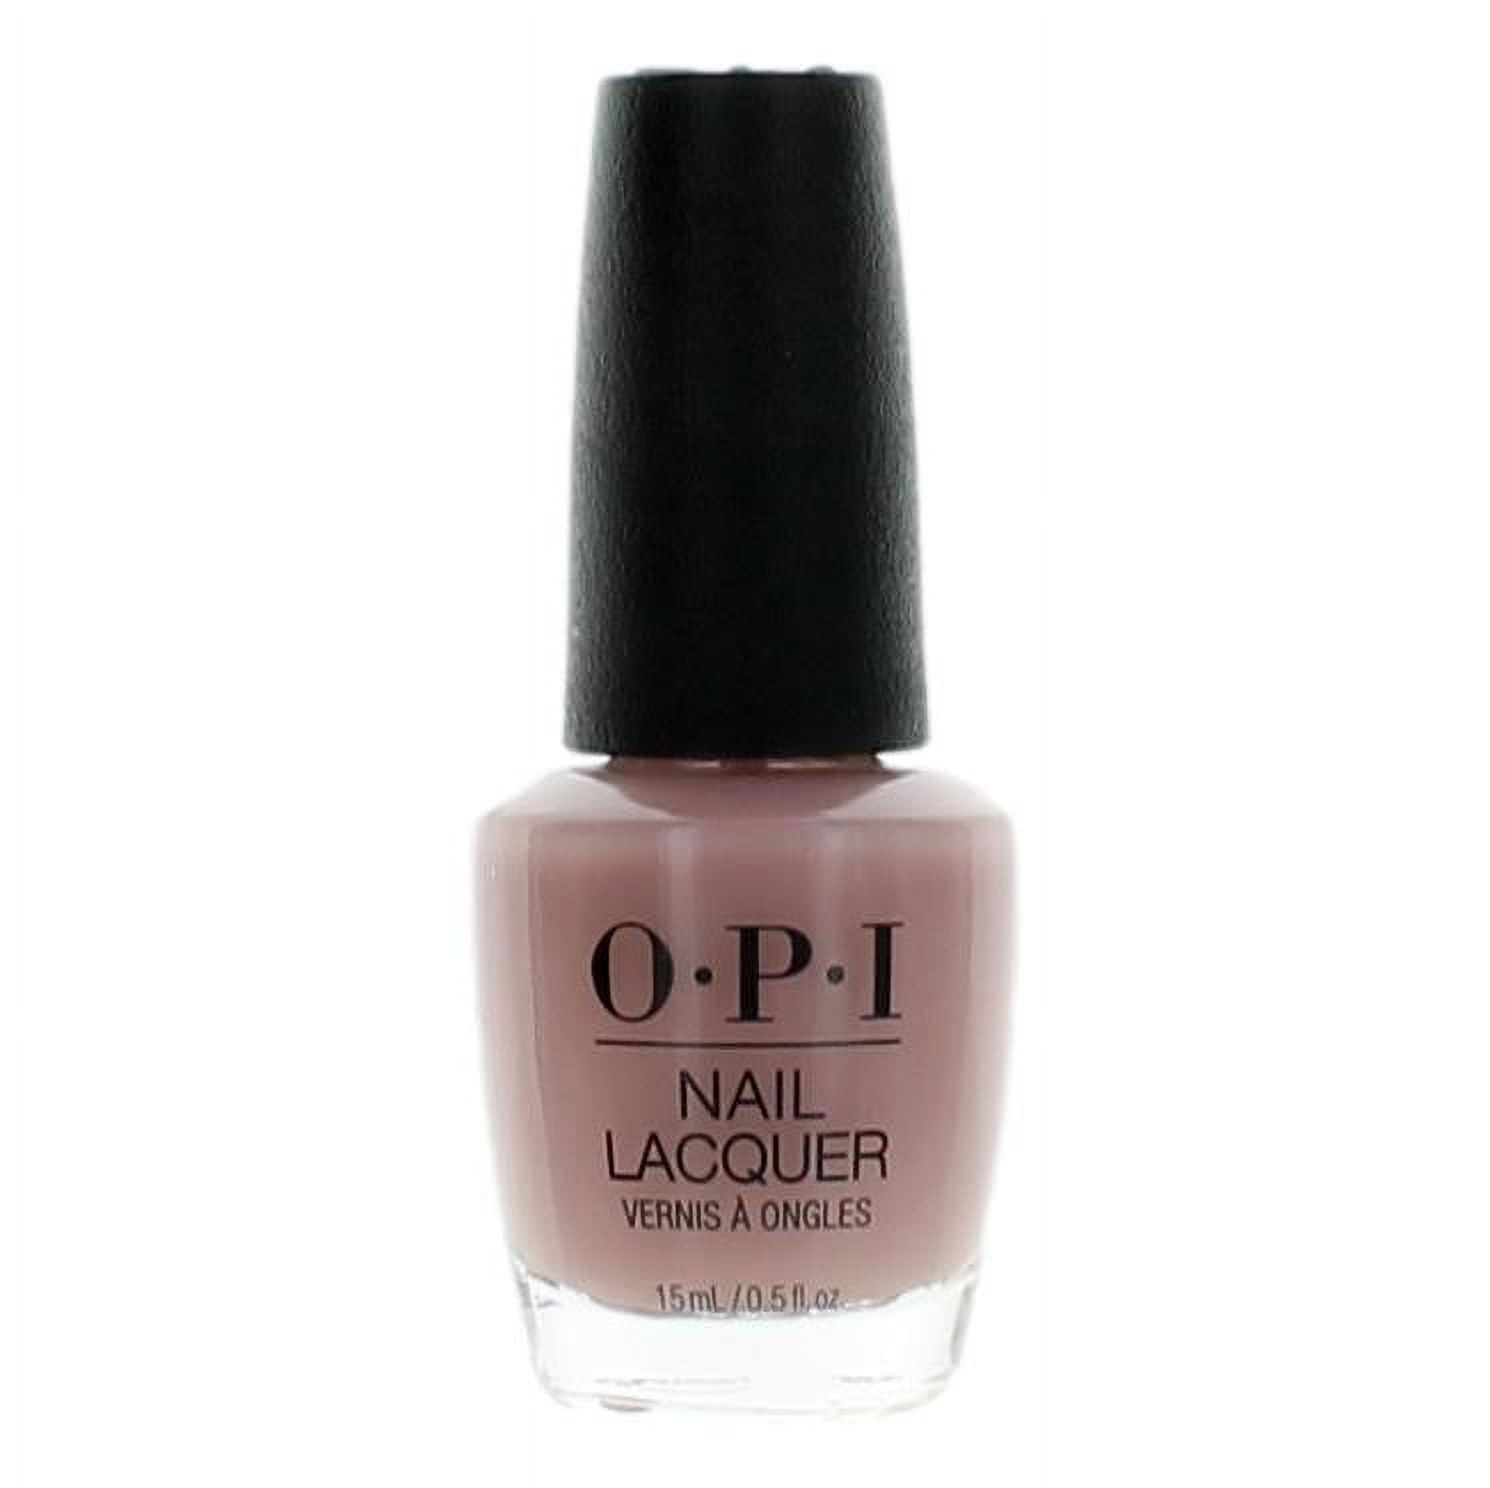 OPI Nail Lacquer - NL SH4 Bare My Soul - image 1 of 8